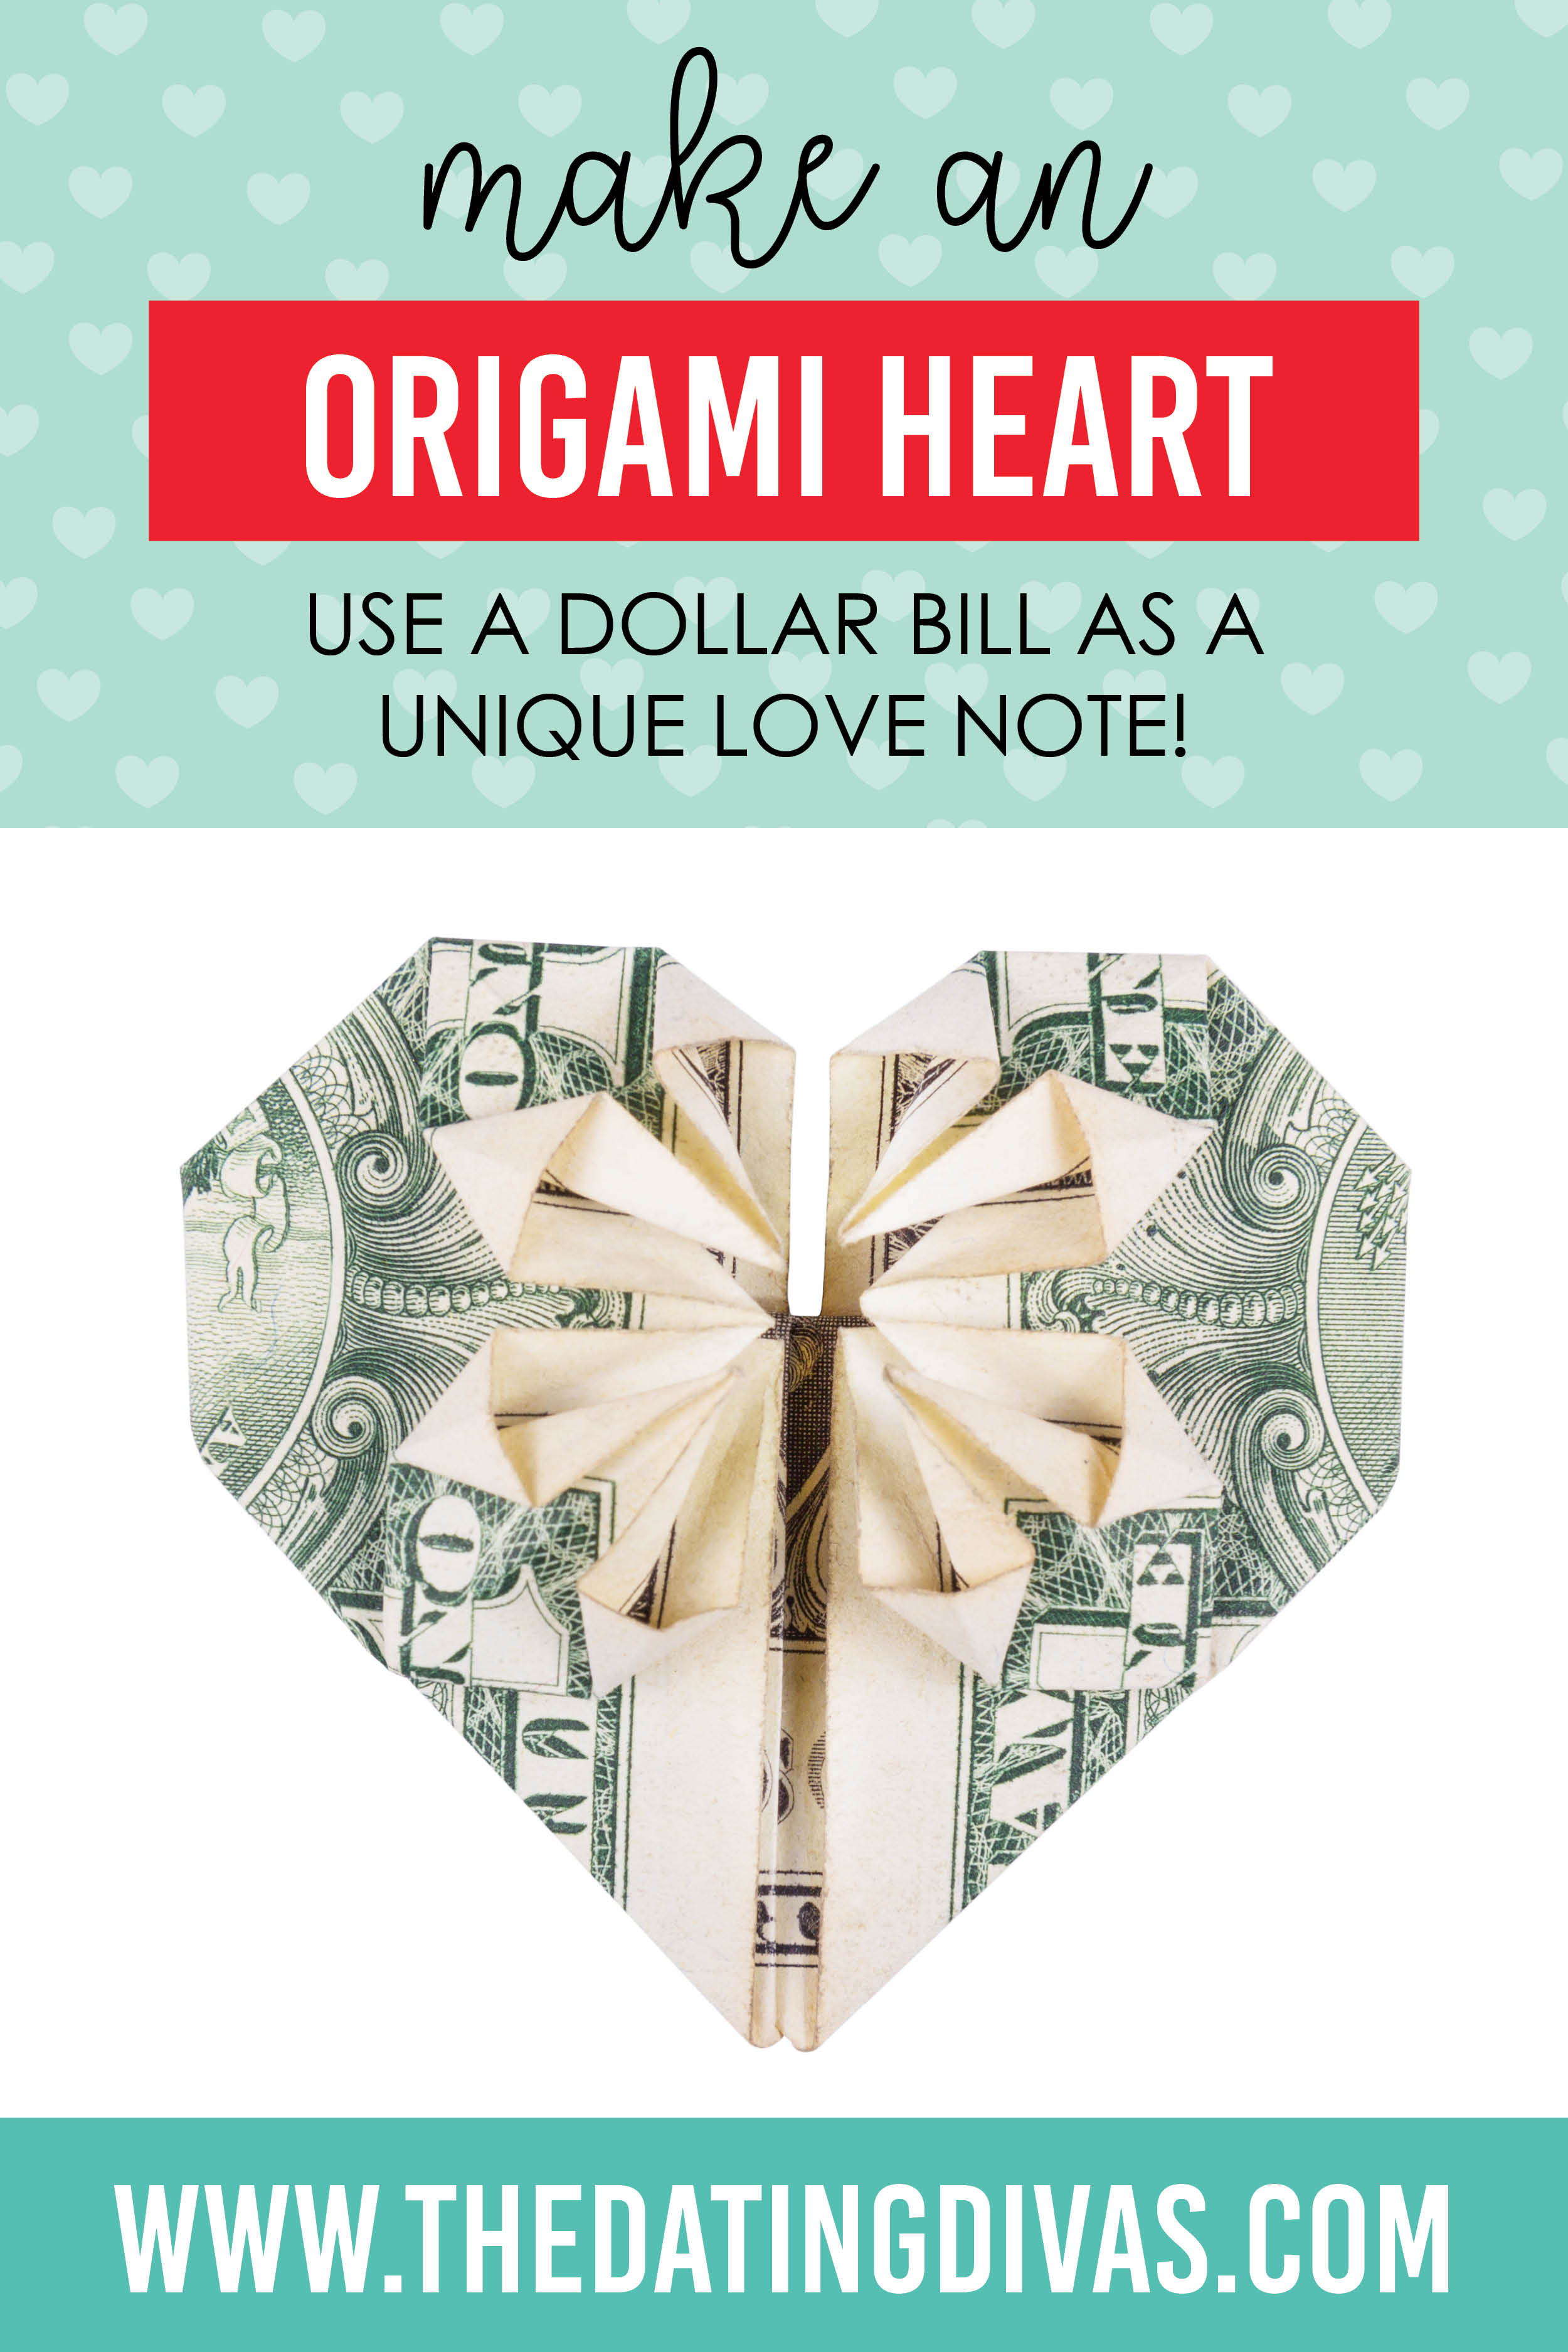 Origami Heart Out Of A Dollar Origami Heart Ideas And How To The Dating Divas